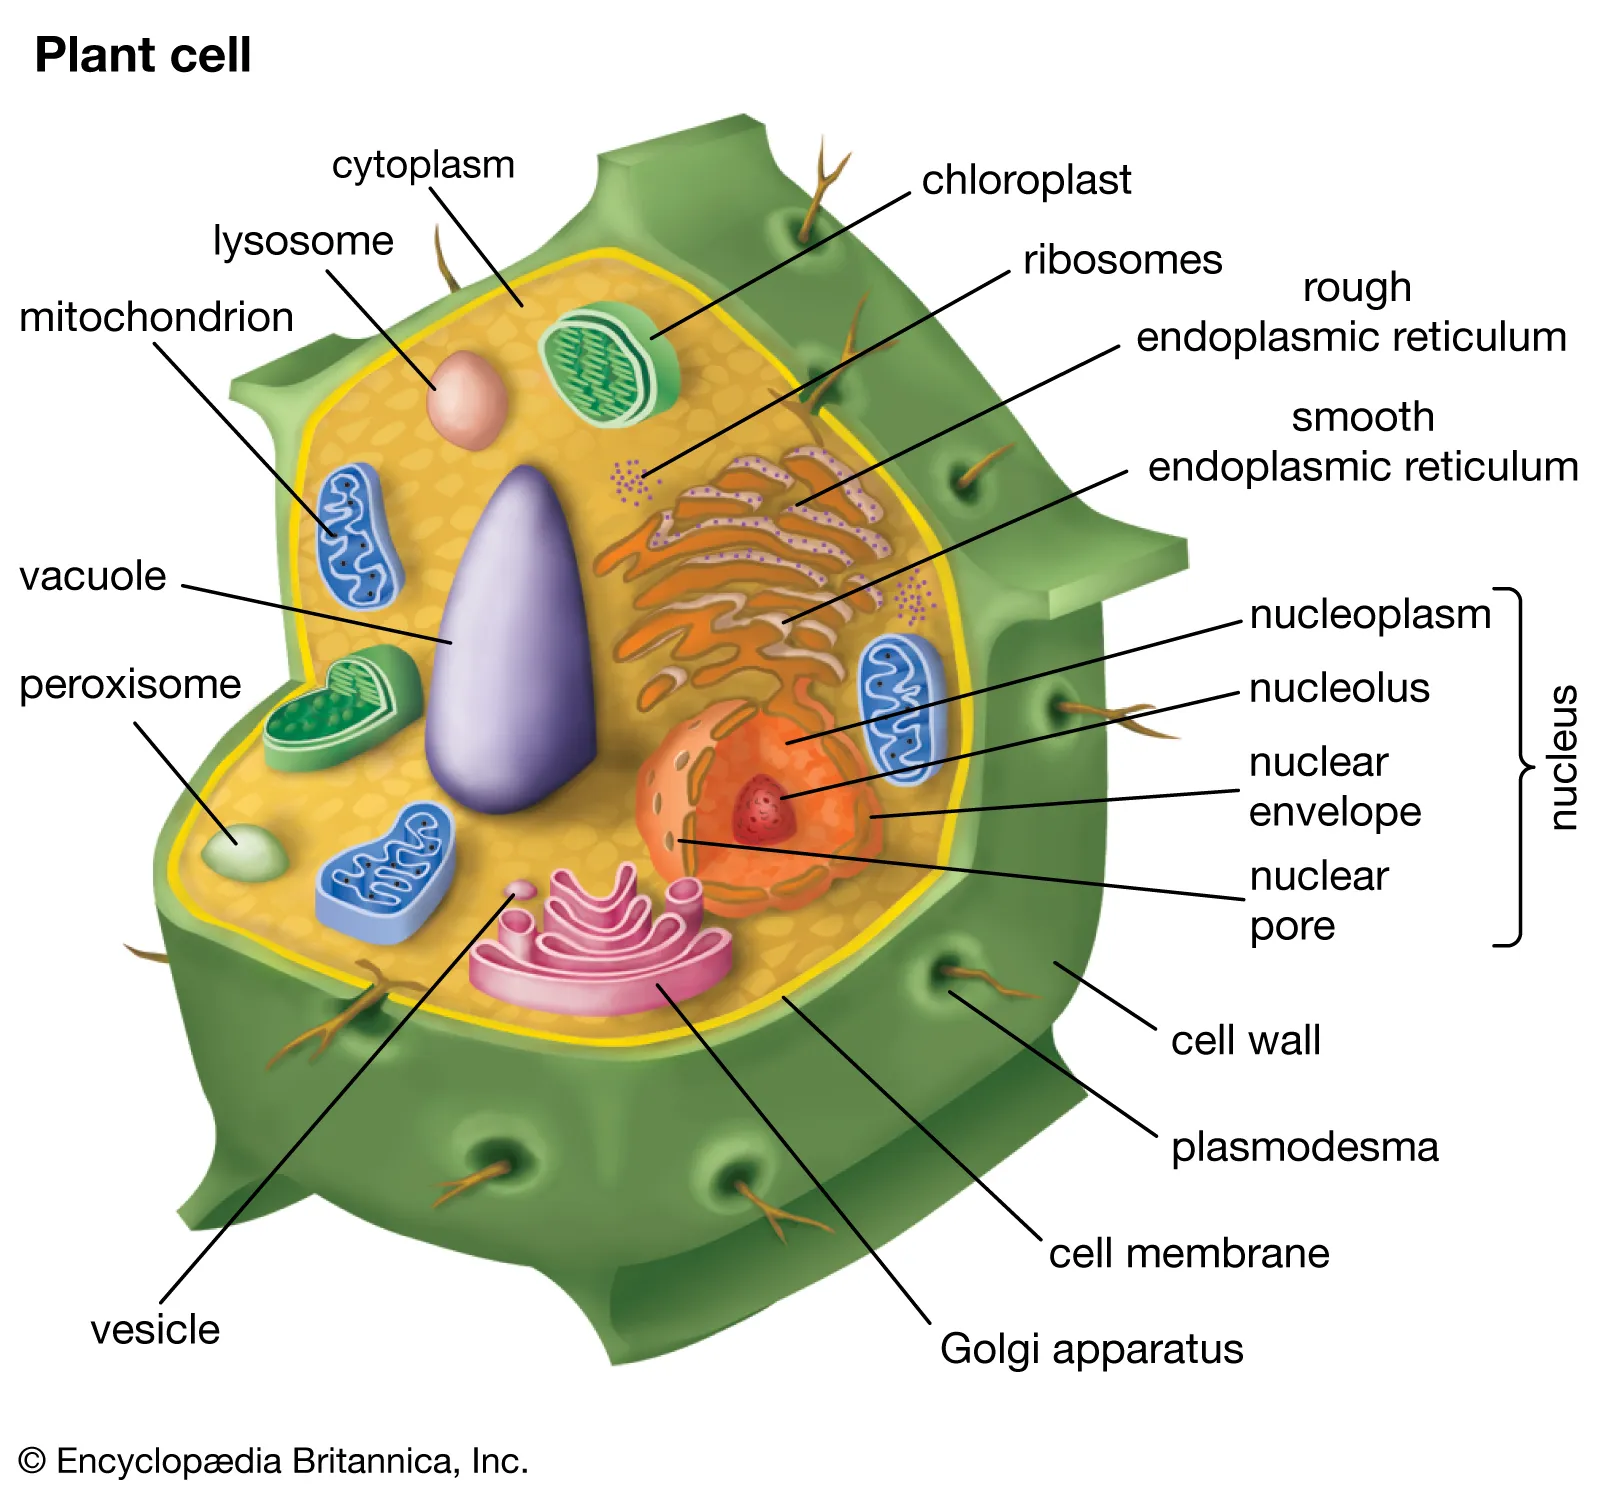 Plant cell with cell wall